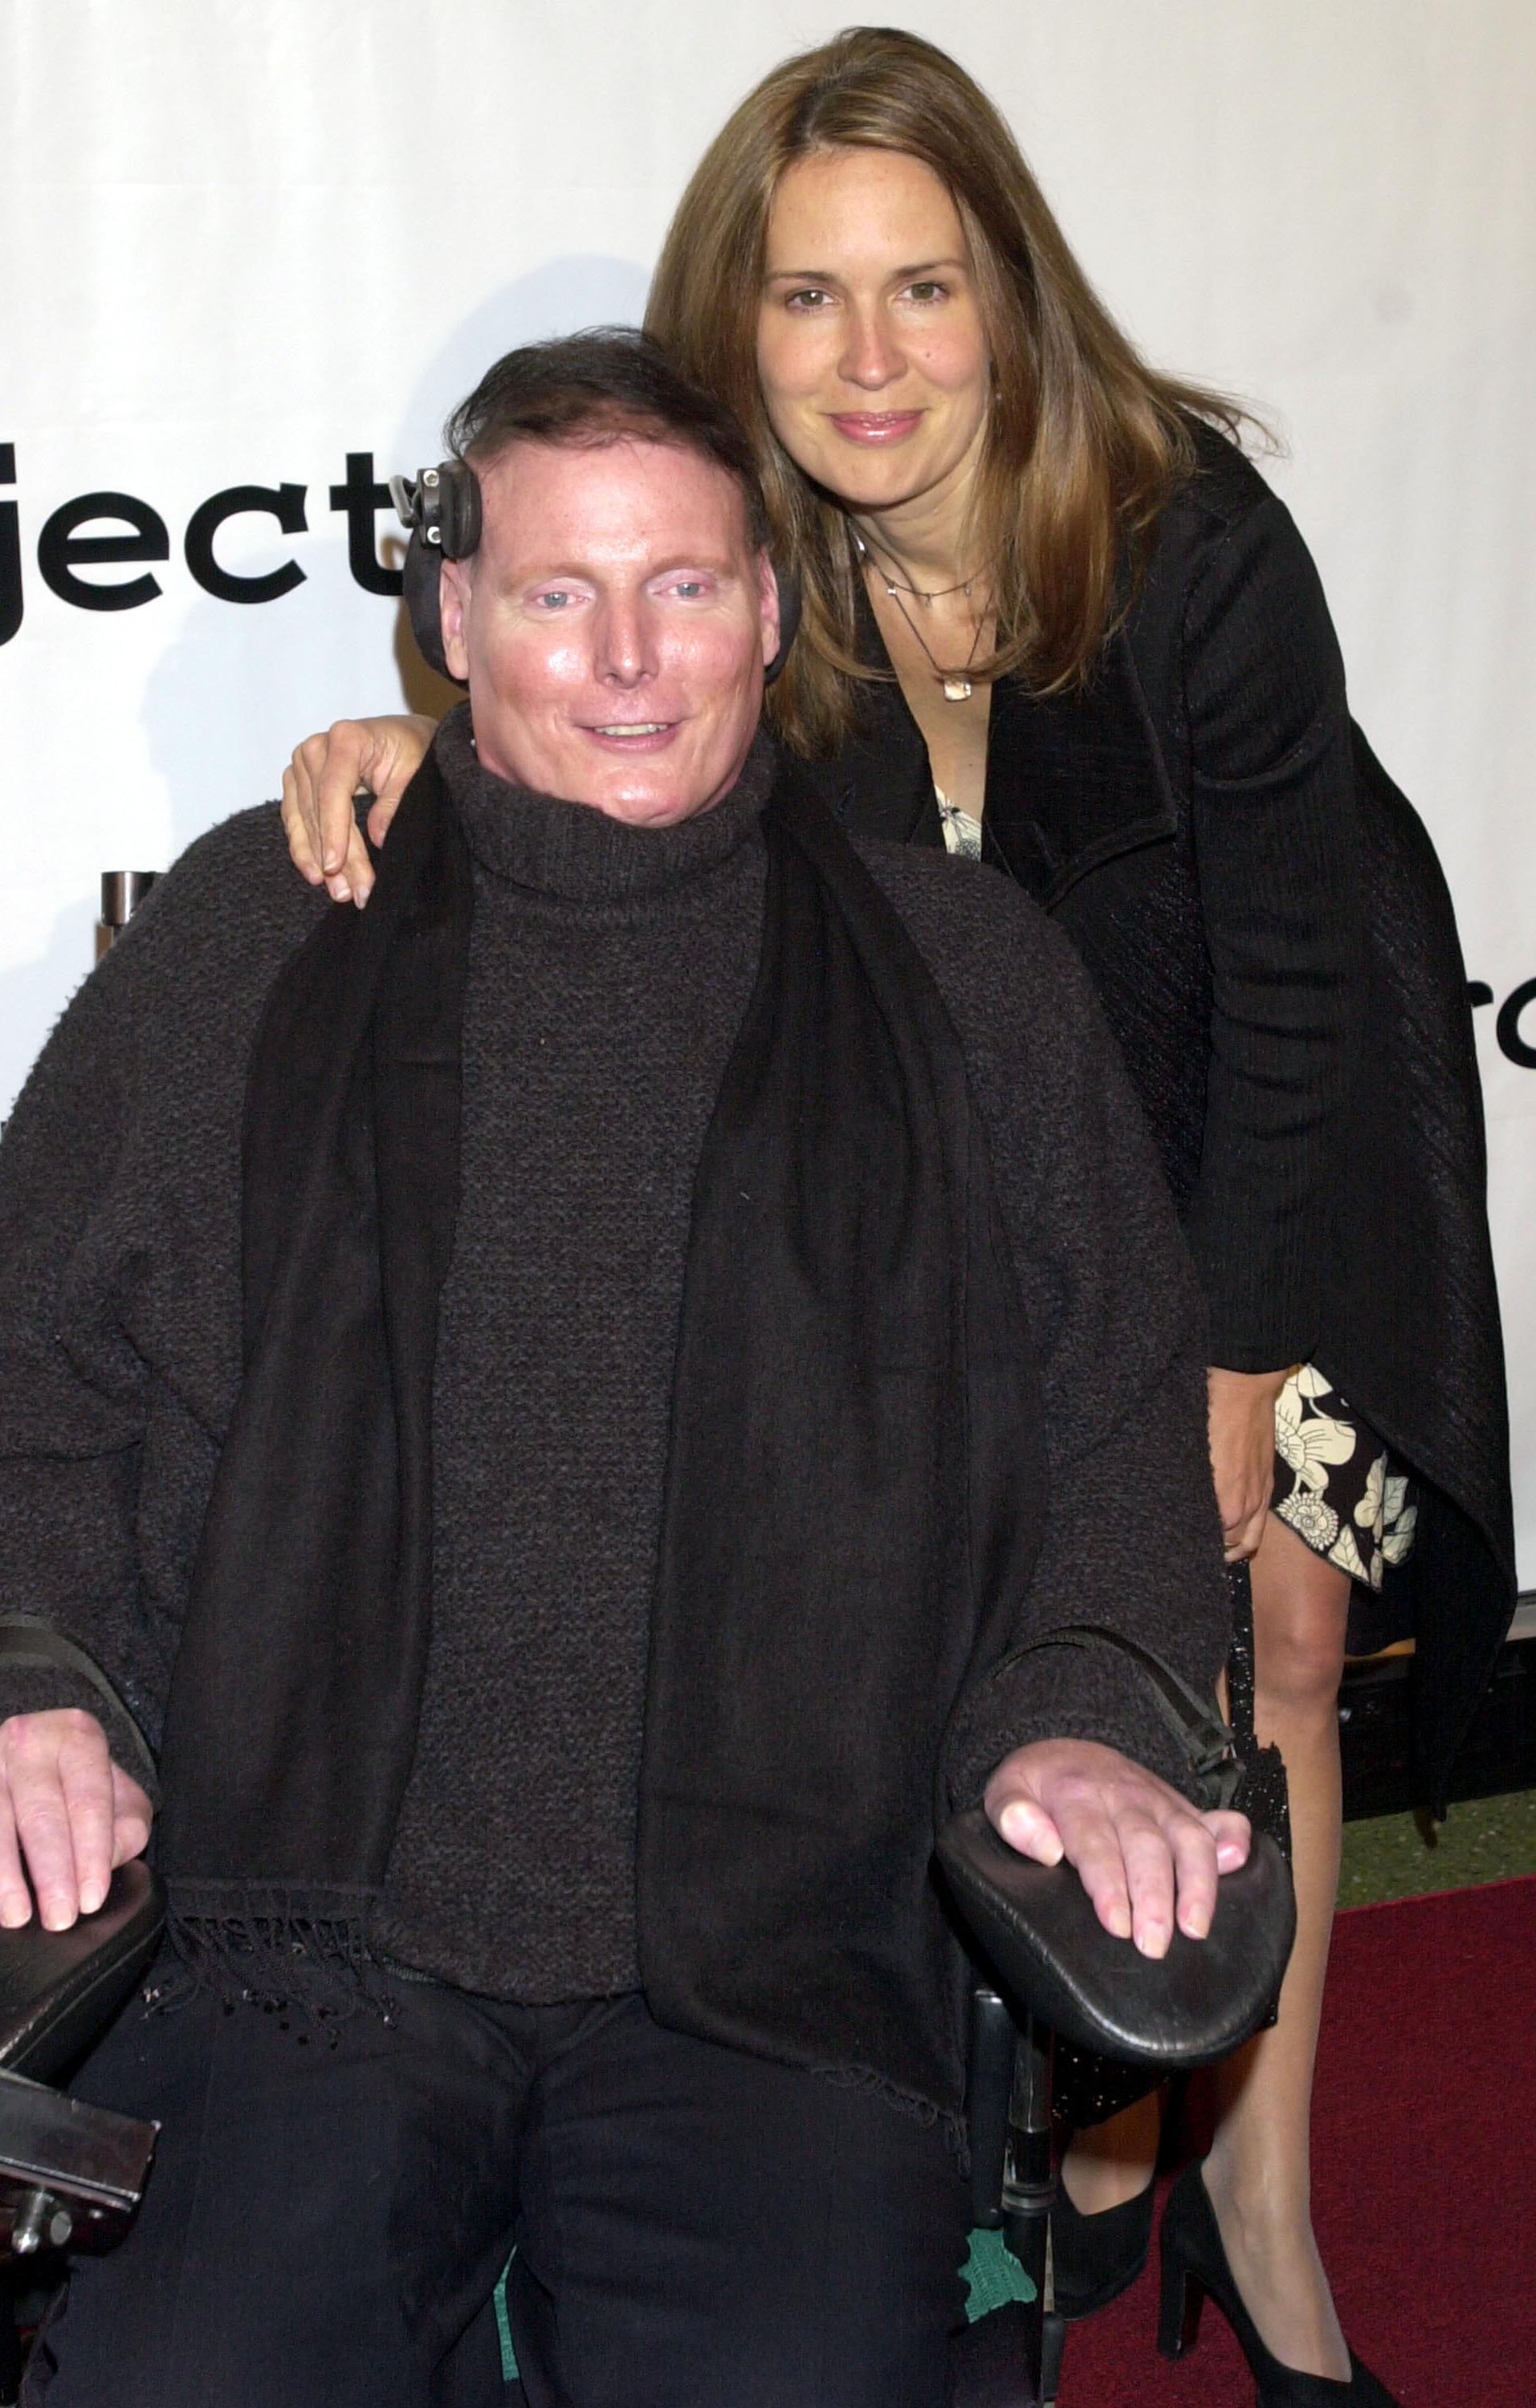 Actor Christopher Reeve and his wife, Dana, attend the Project A.L.S. (Amyotrophic Lateral Sclerosis) 5th Annual New York City Gala "Tomorrow is Tonight" benefit on October 21, 2002 in New York City. | Source: Getty Images